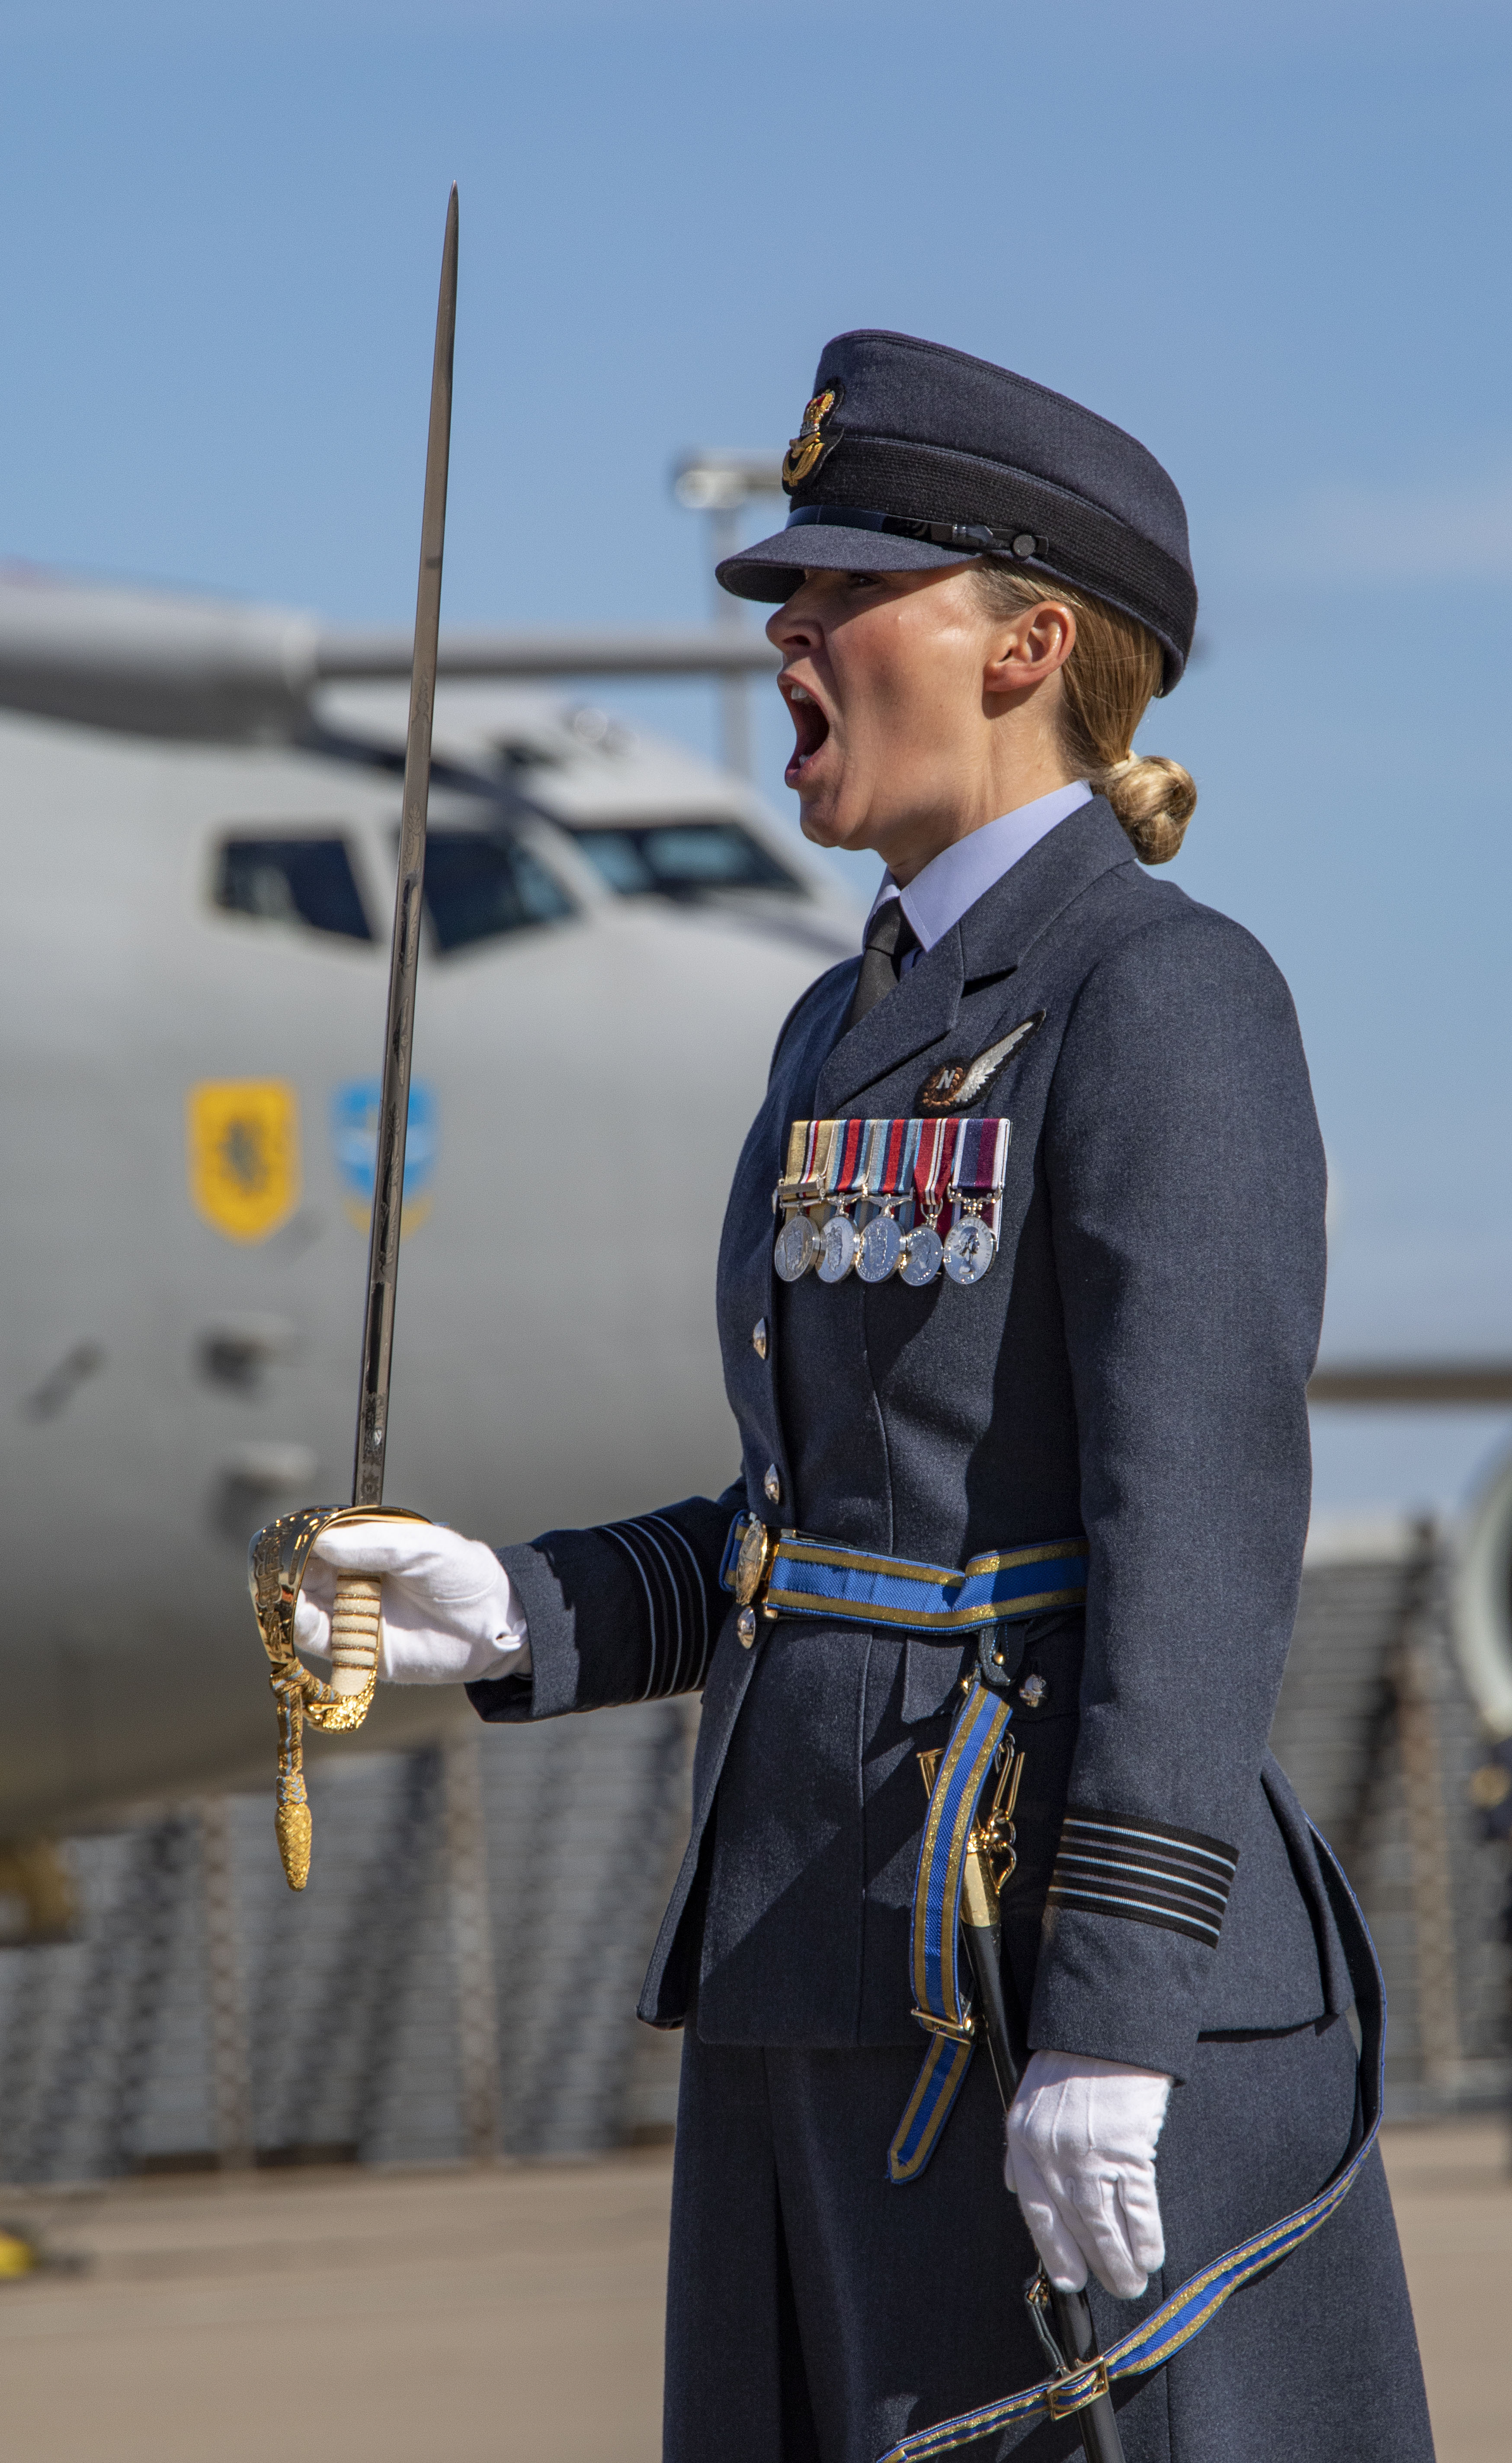 Wing Commander Williams reviewing with sword.